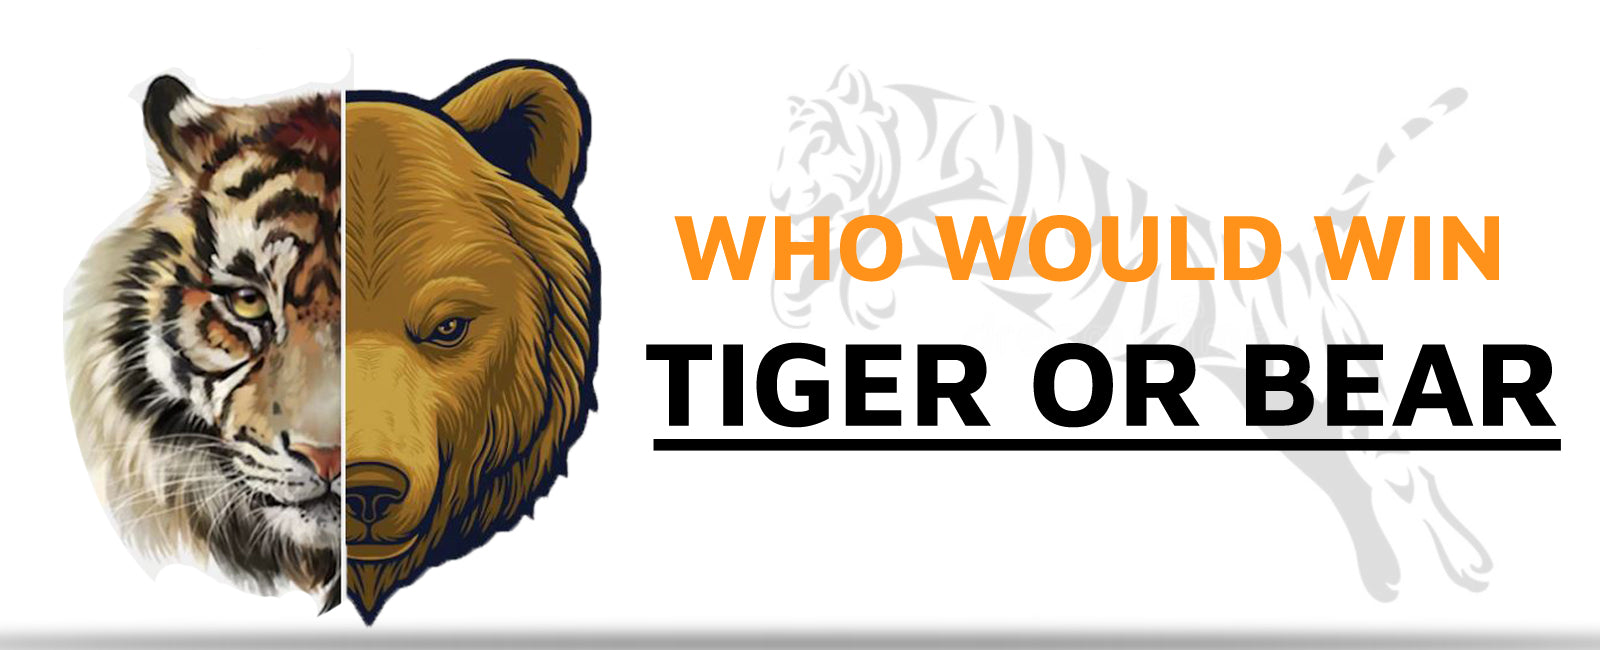 Who Would Win Tiger or Bear?